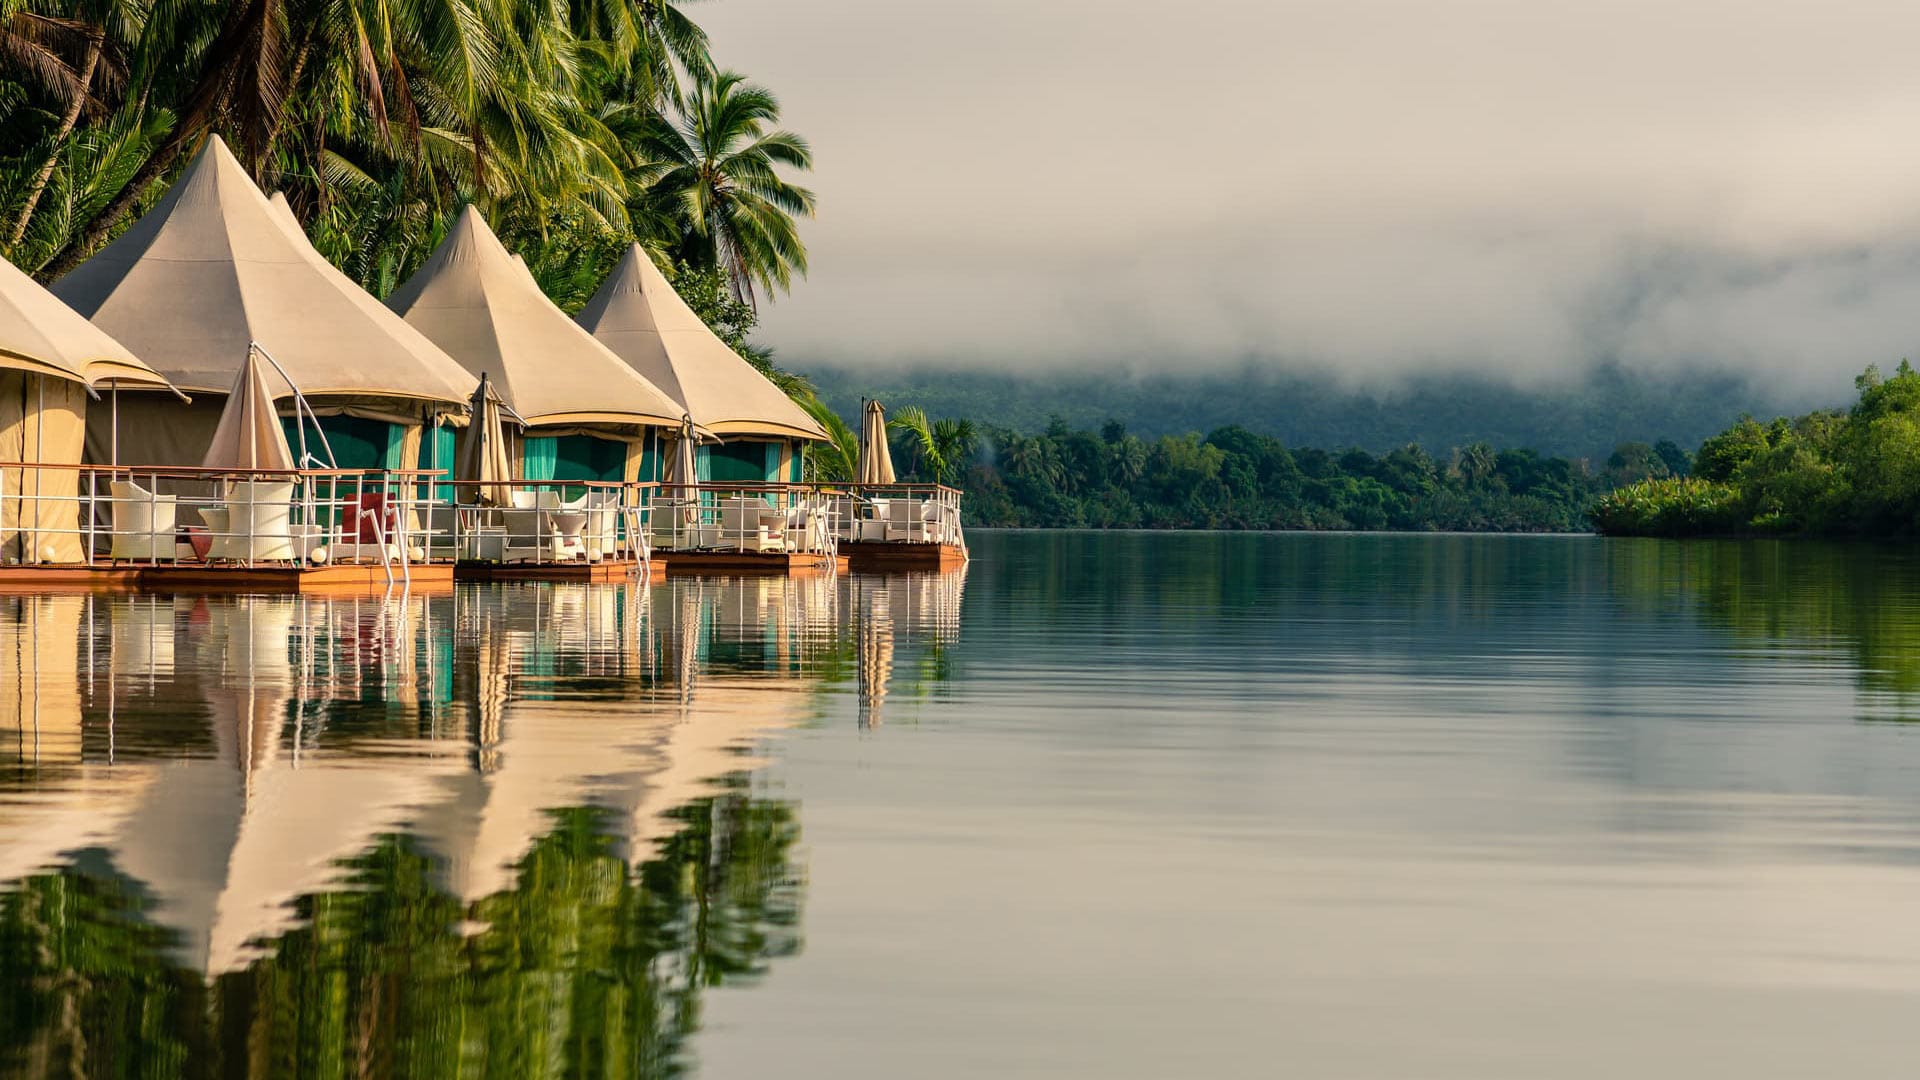 4 Rivers Floating Lodge: Experience the Cardamom Rainforest